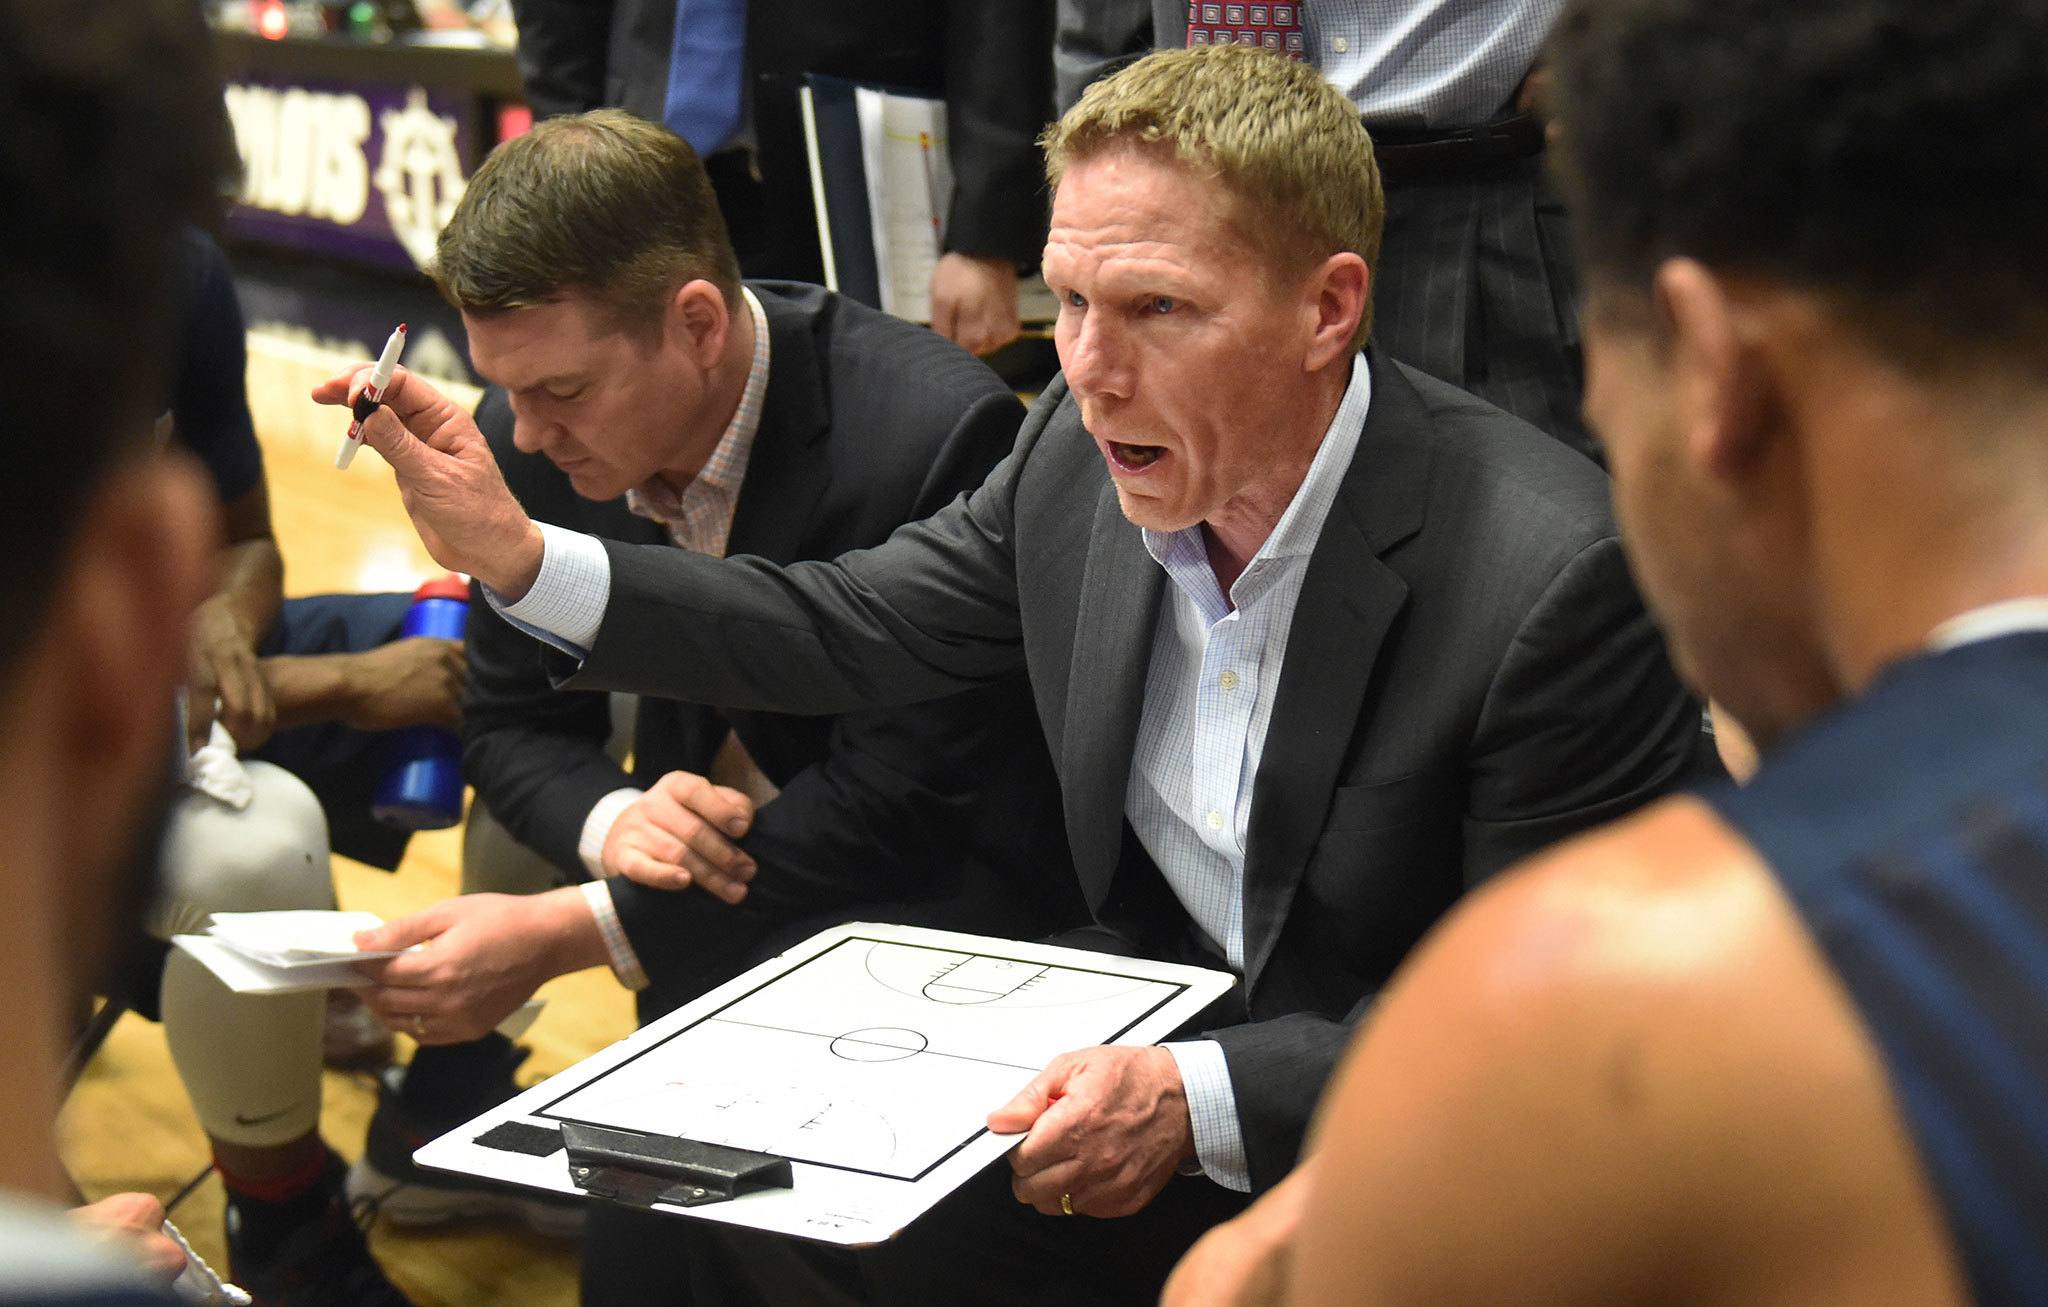 Gonzaga men’s basketball coach Mark Few speaks with his team during the second half of the Bulldogs’ game against Portland on Monday night. (AP Photo/Steve Dykes)